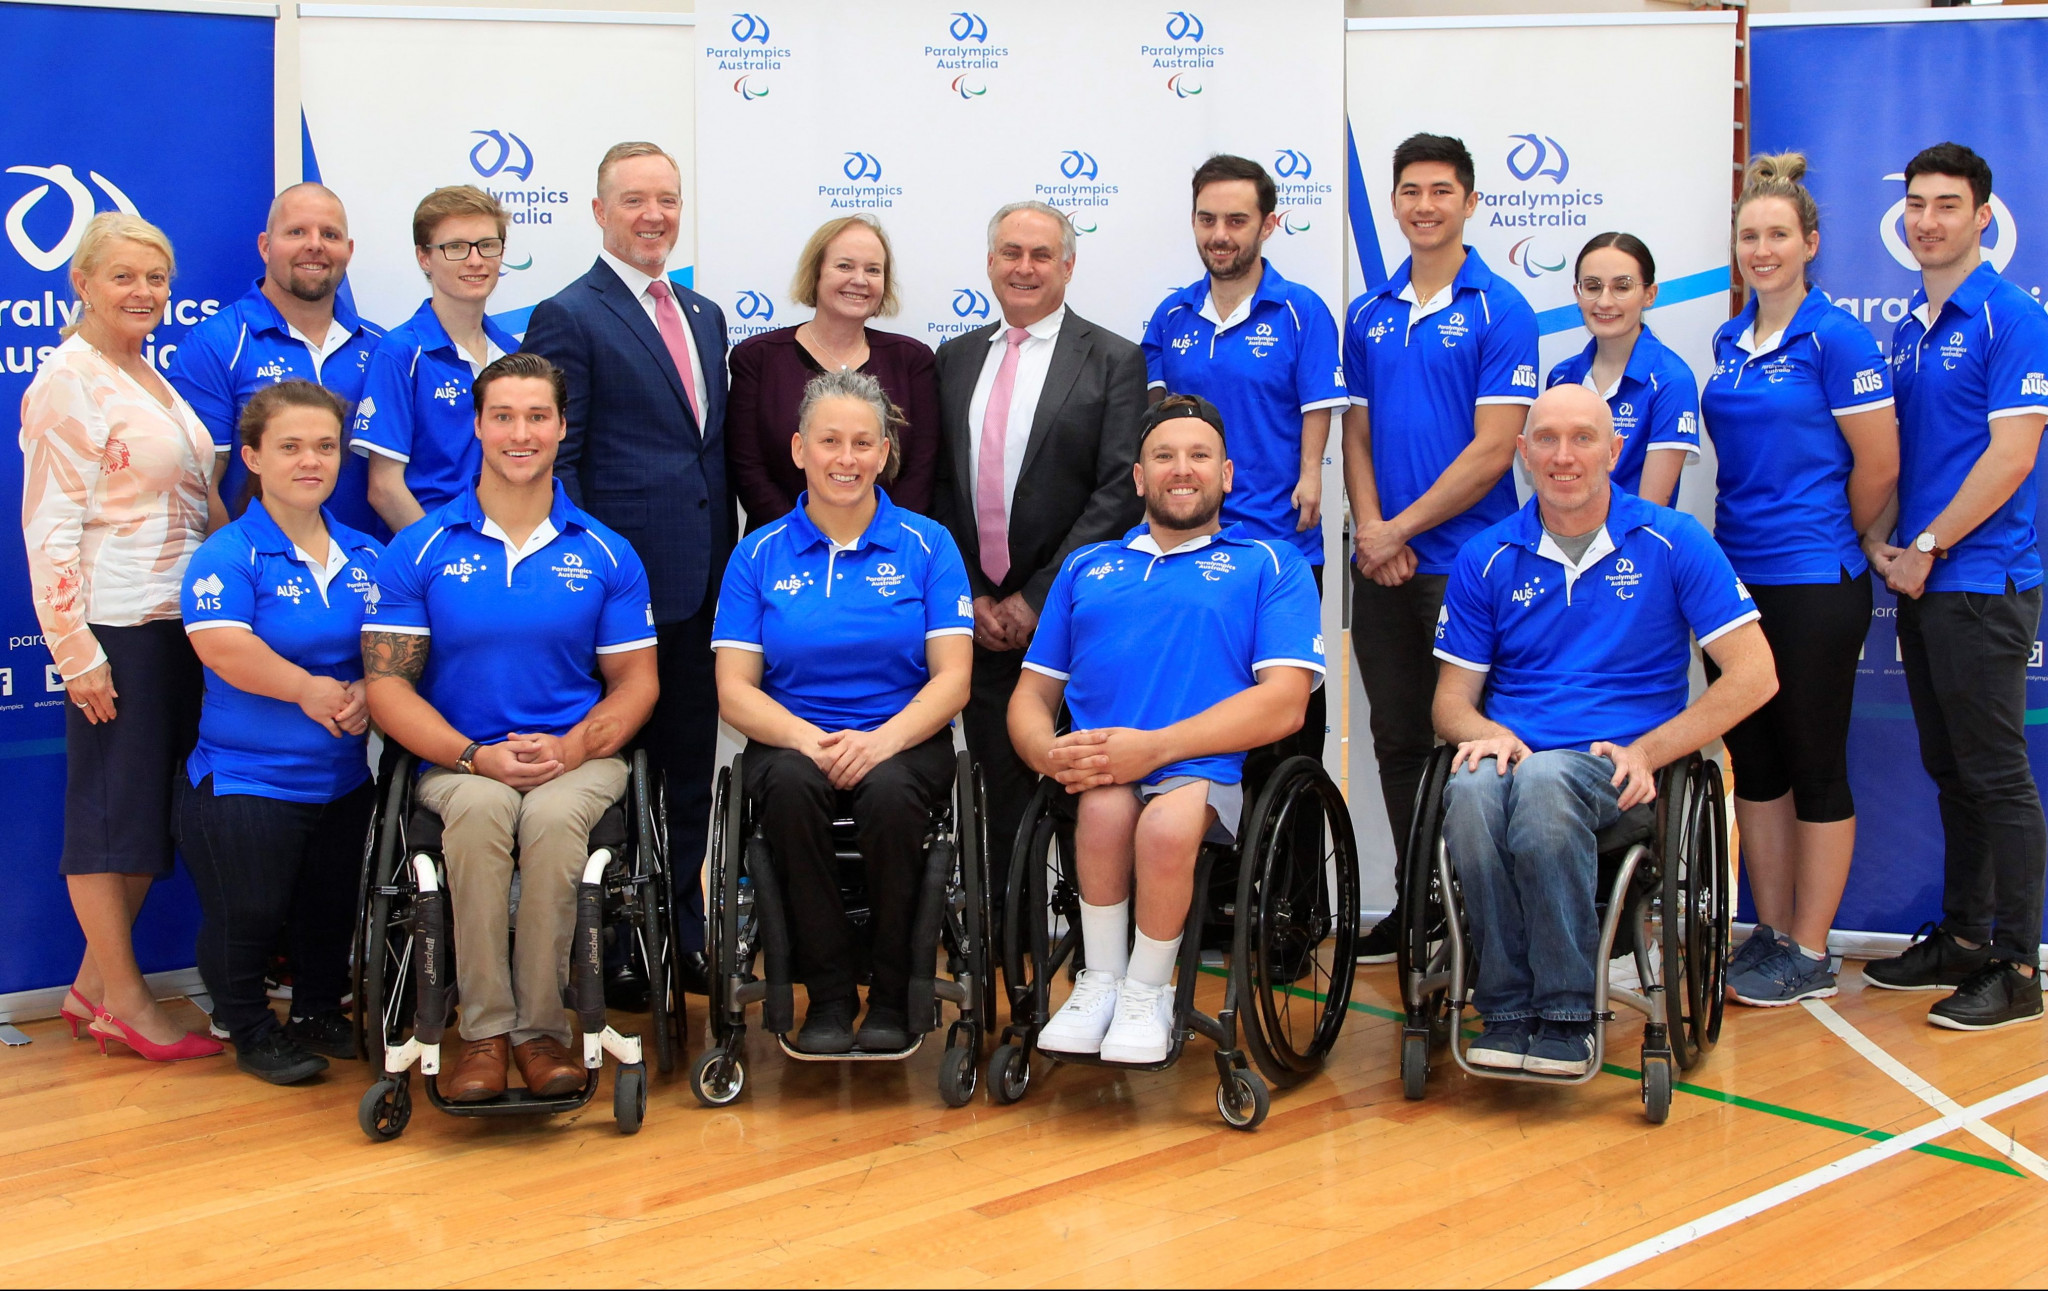 Australia's Labor Party, seeking election on Saturday, has announced a commitment to Para athletics of AUSD$6million if it is successful ©paralympic.org.au